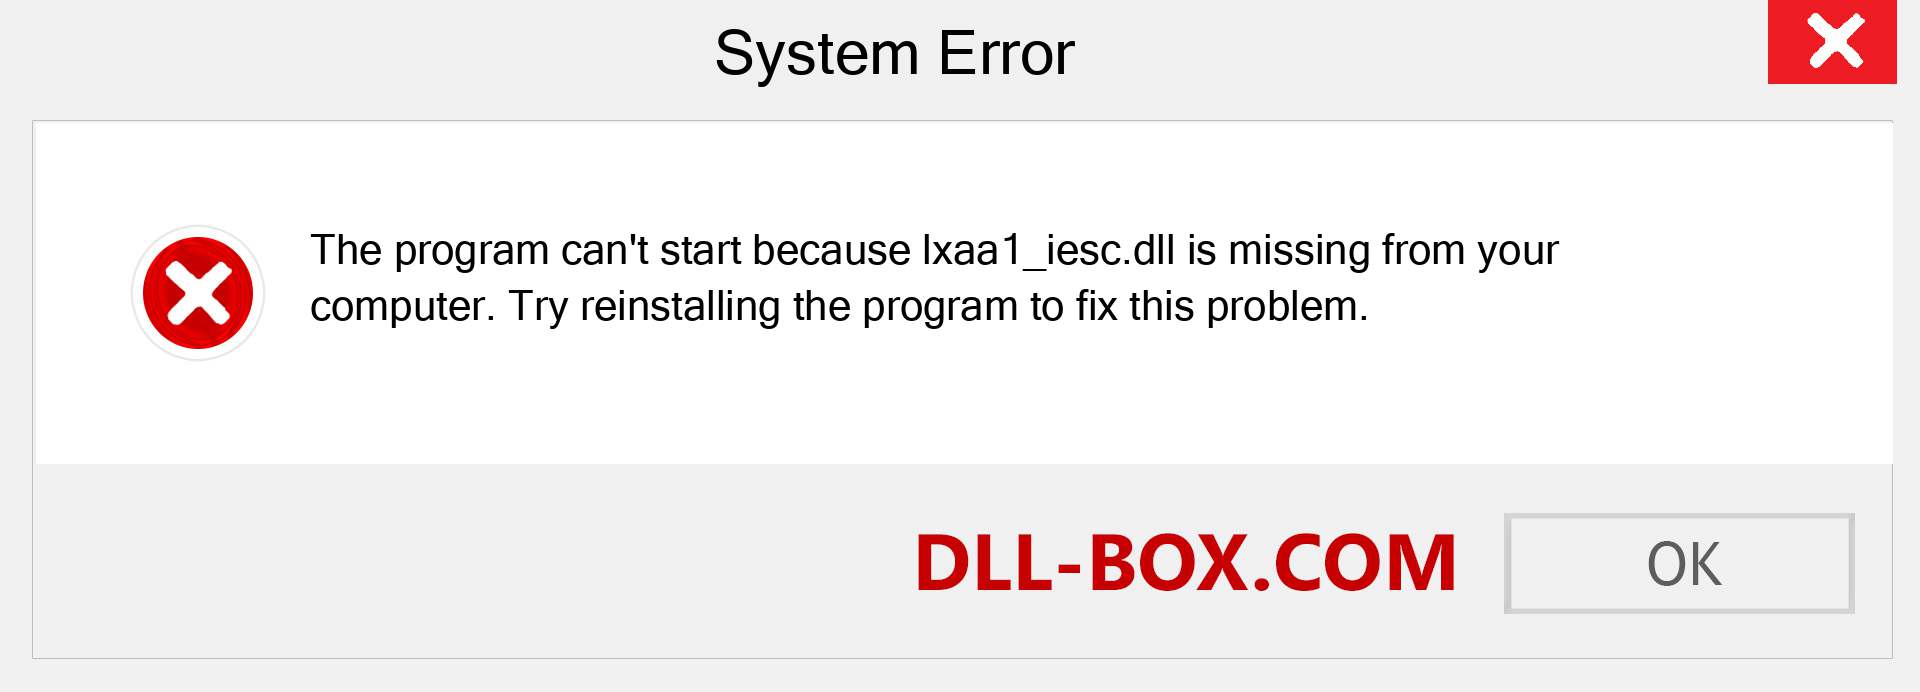  lxaa1_iesc.dll file is missing?. Download for Windows 7, 8, 10 - Fix  lxaa1_iesc dll Missing Error on Windows, photos, images